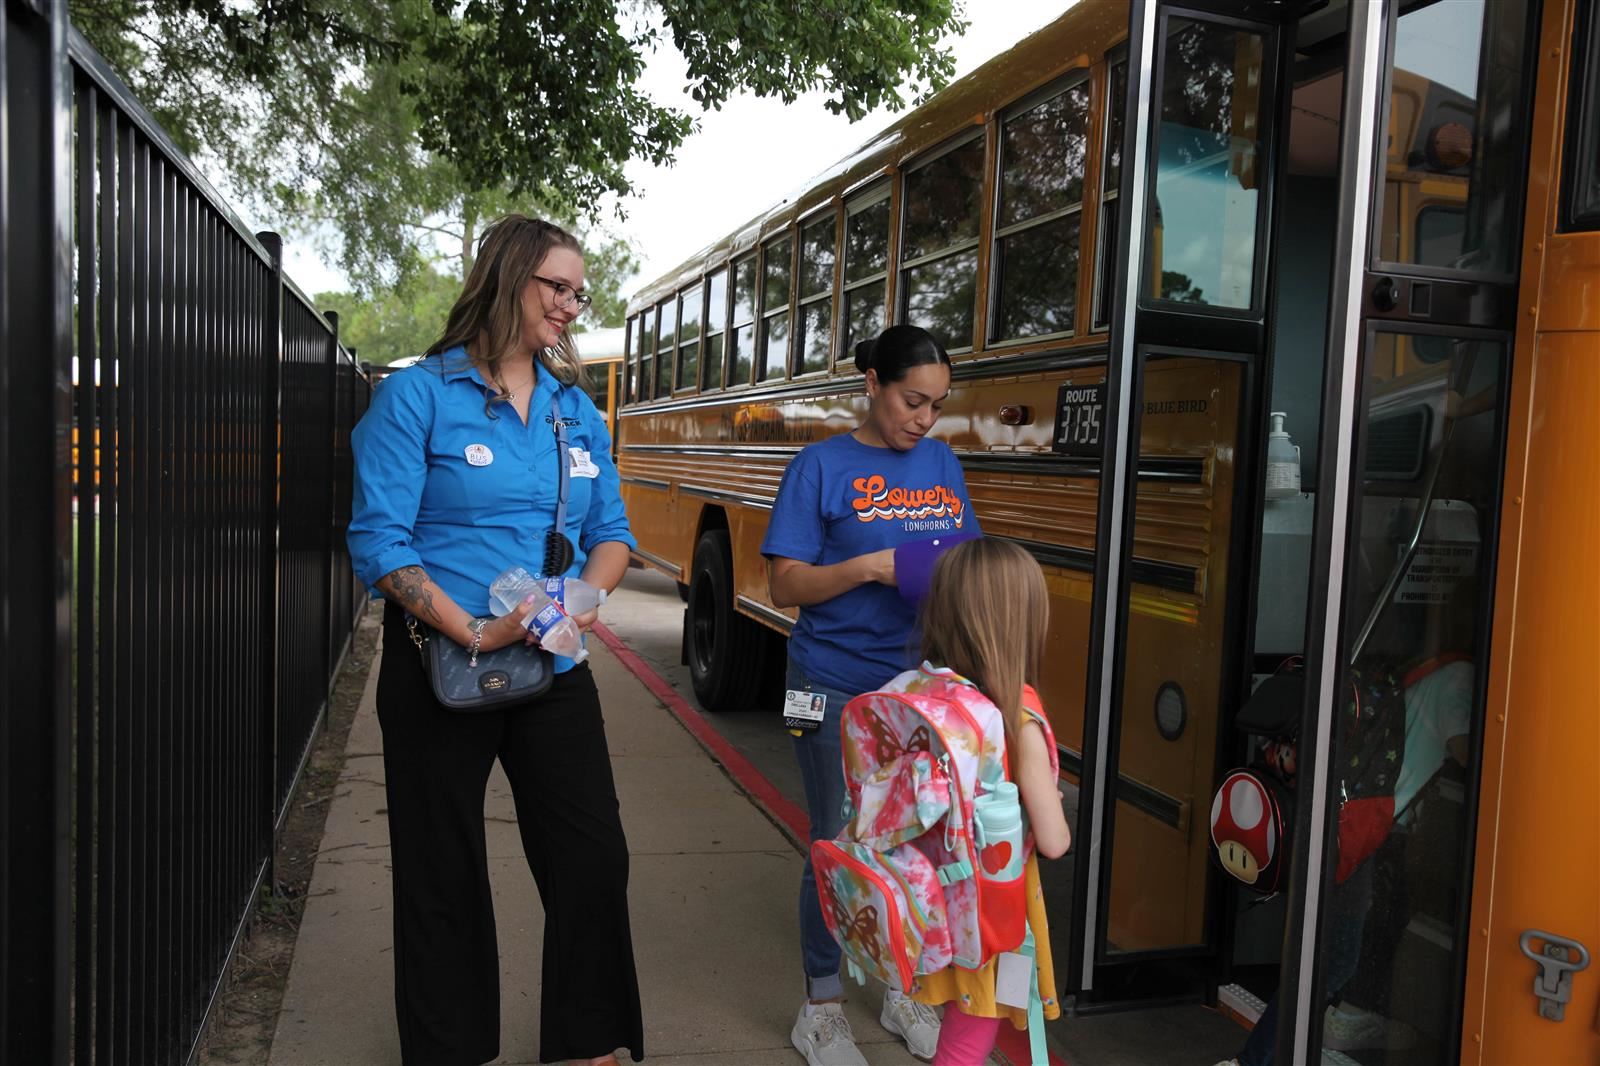 Annie Morris with Outback Steakhouse assists Lowery Elementary School Aide Wanda Orellana in welcoming young bus riders.